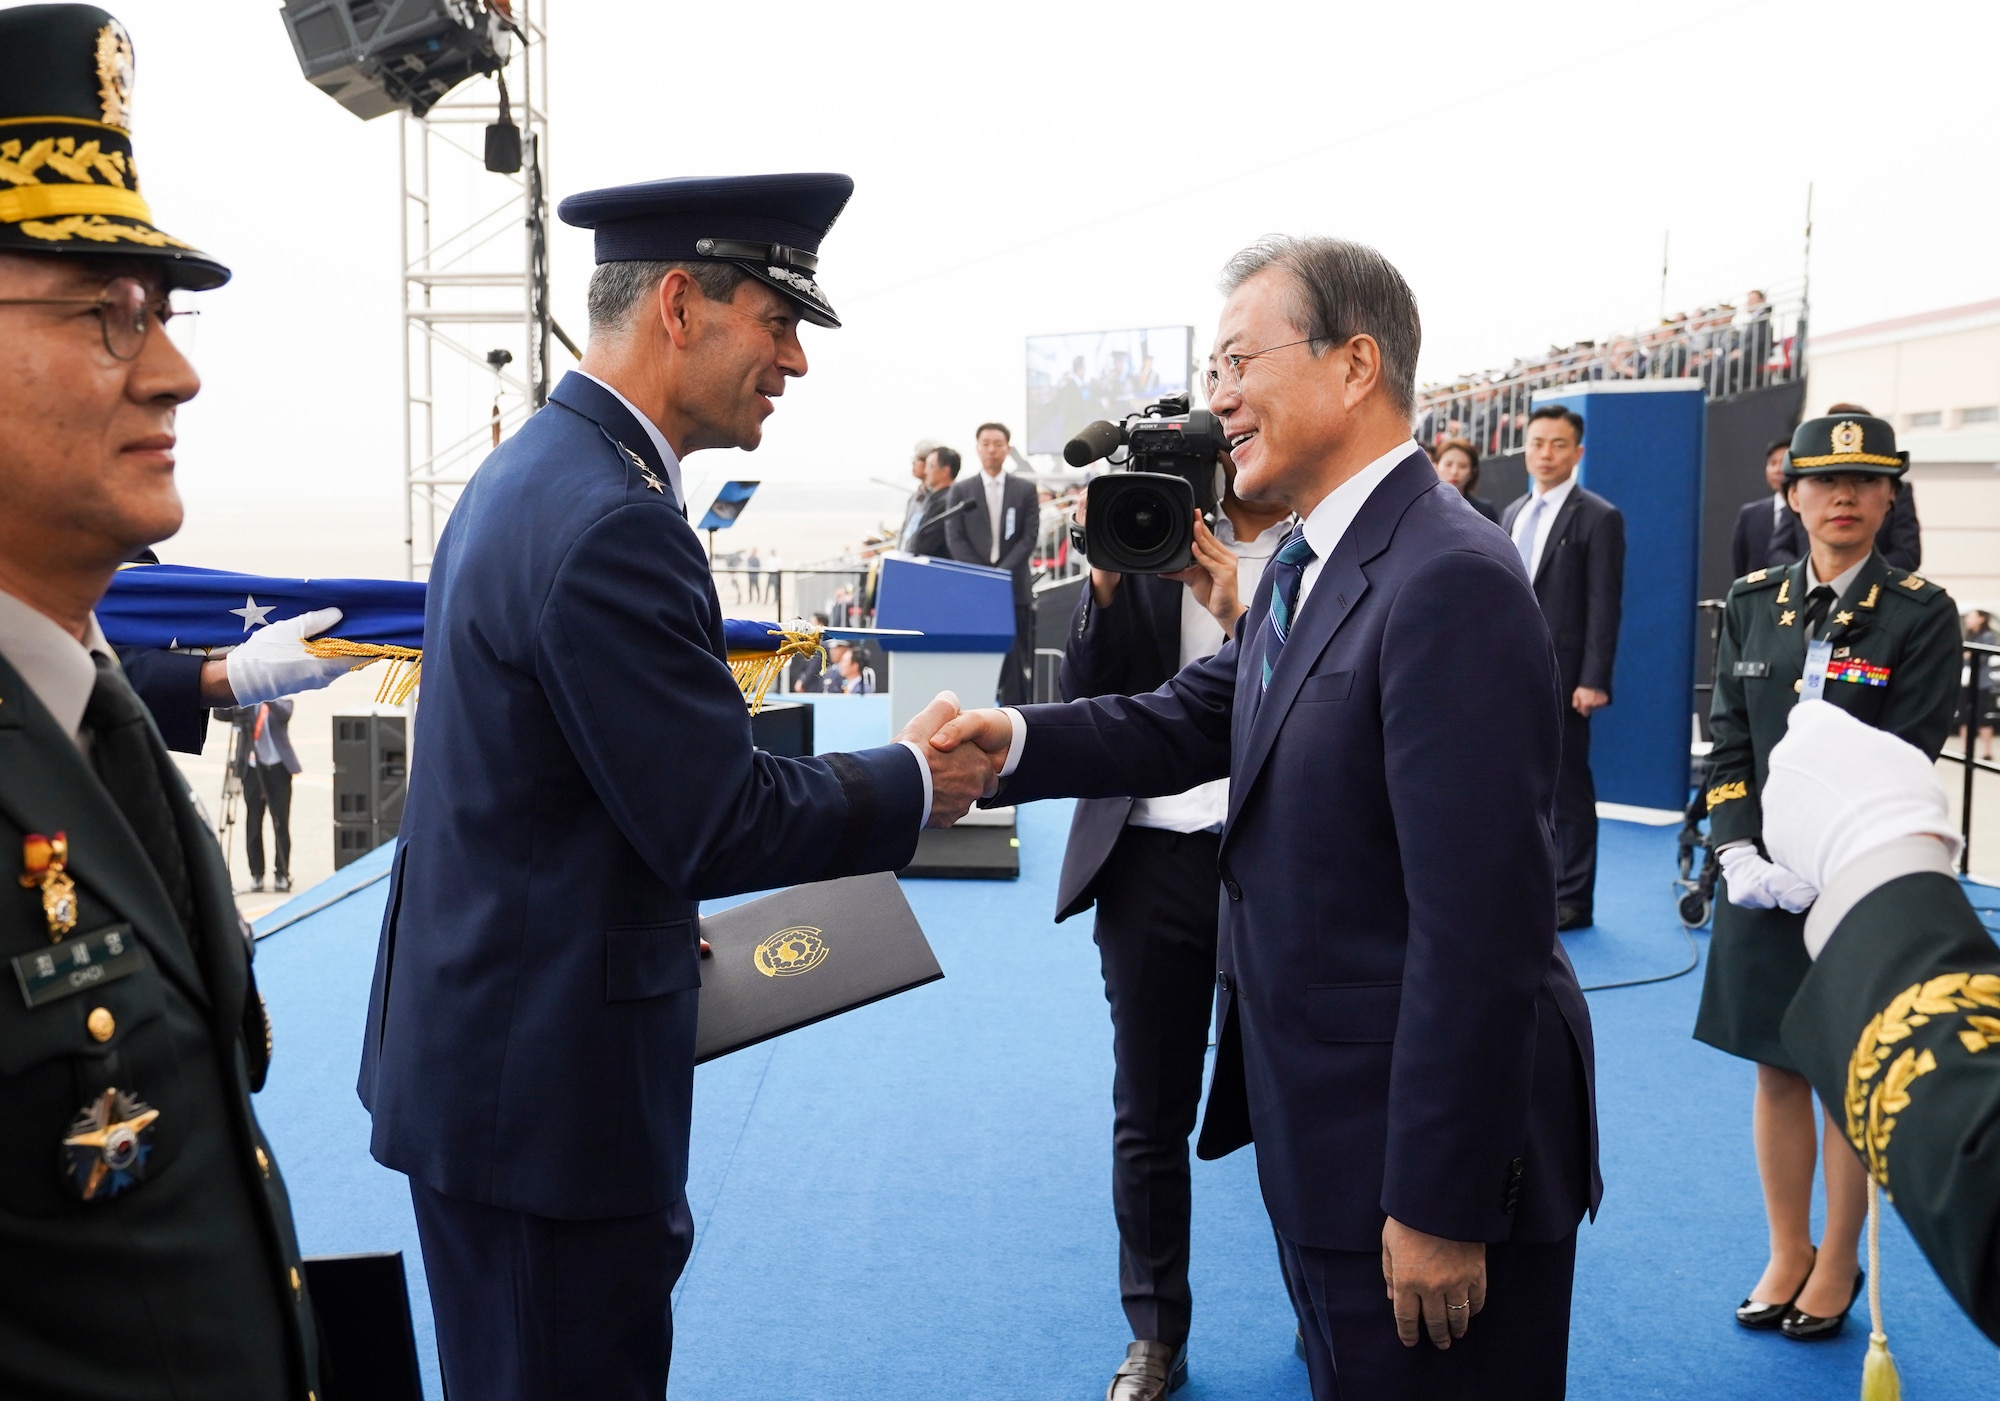 Lt. Gen. Kenneth S. Wilsbach, Seventh Air Force commander, accepted the Republic of Korea Presidential Unit Citation to Seventh Air Force from President Moon Jae-in during a Korean Armed Forces Day celebration at Daegu Air Base, ROK, on October 1. (Courtesy photo)